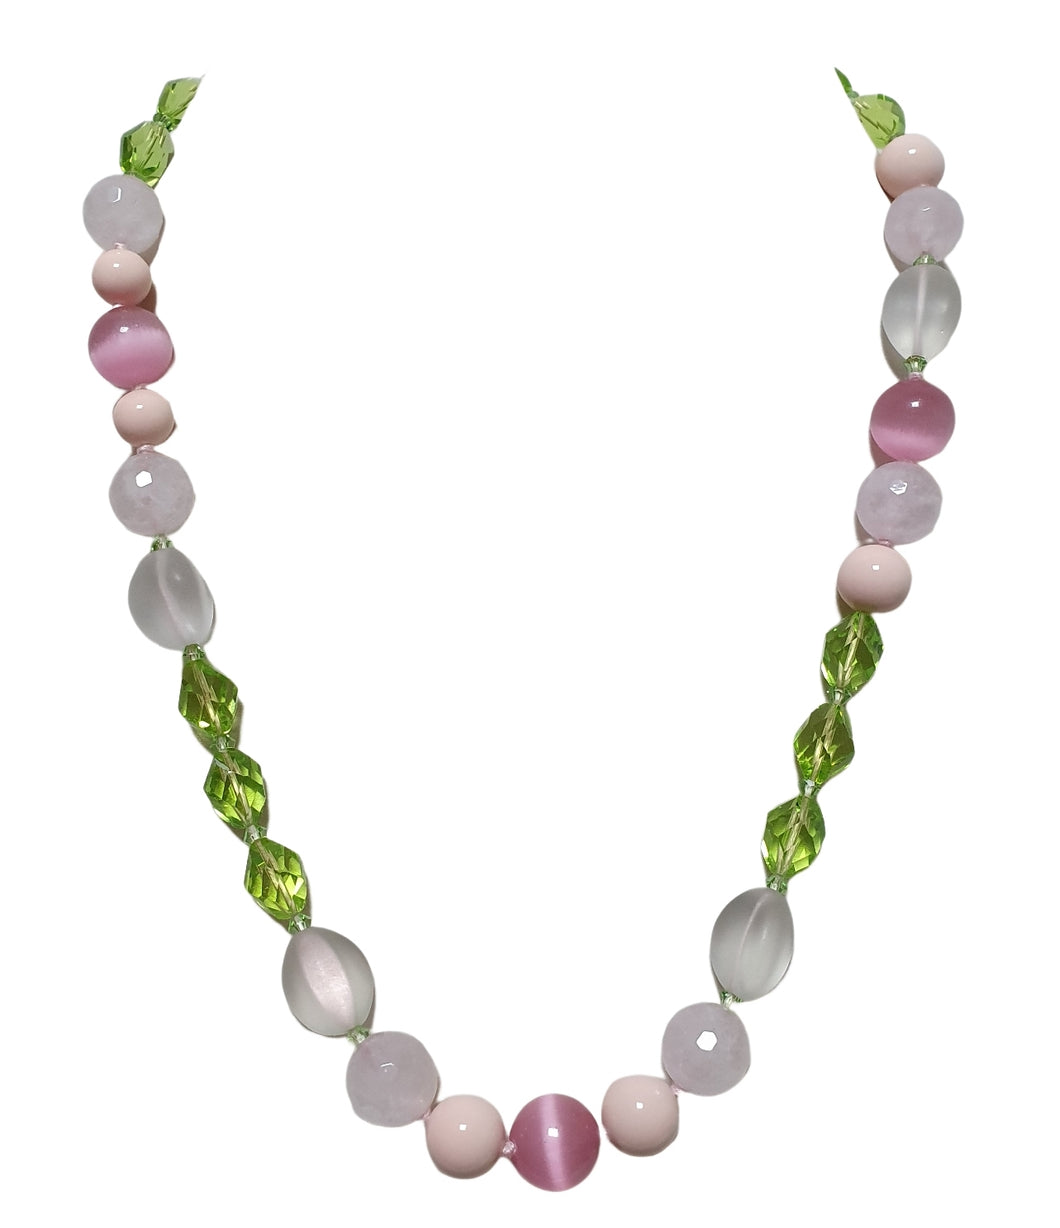 Multicolored chained necklace with central